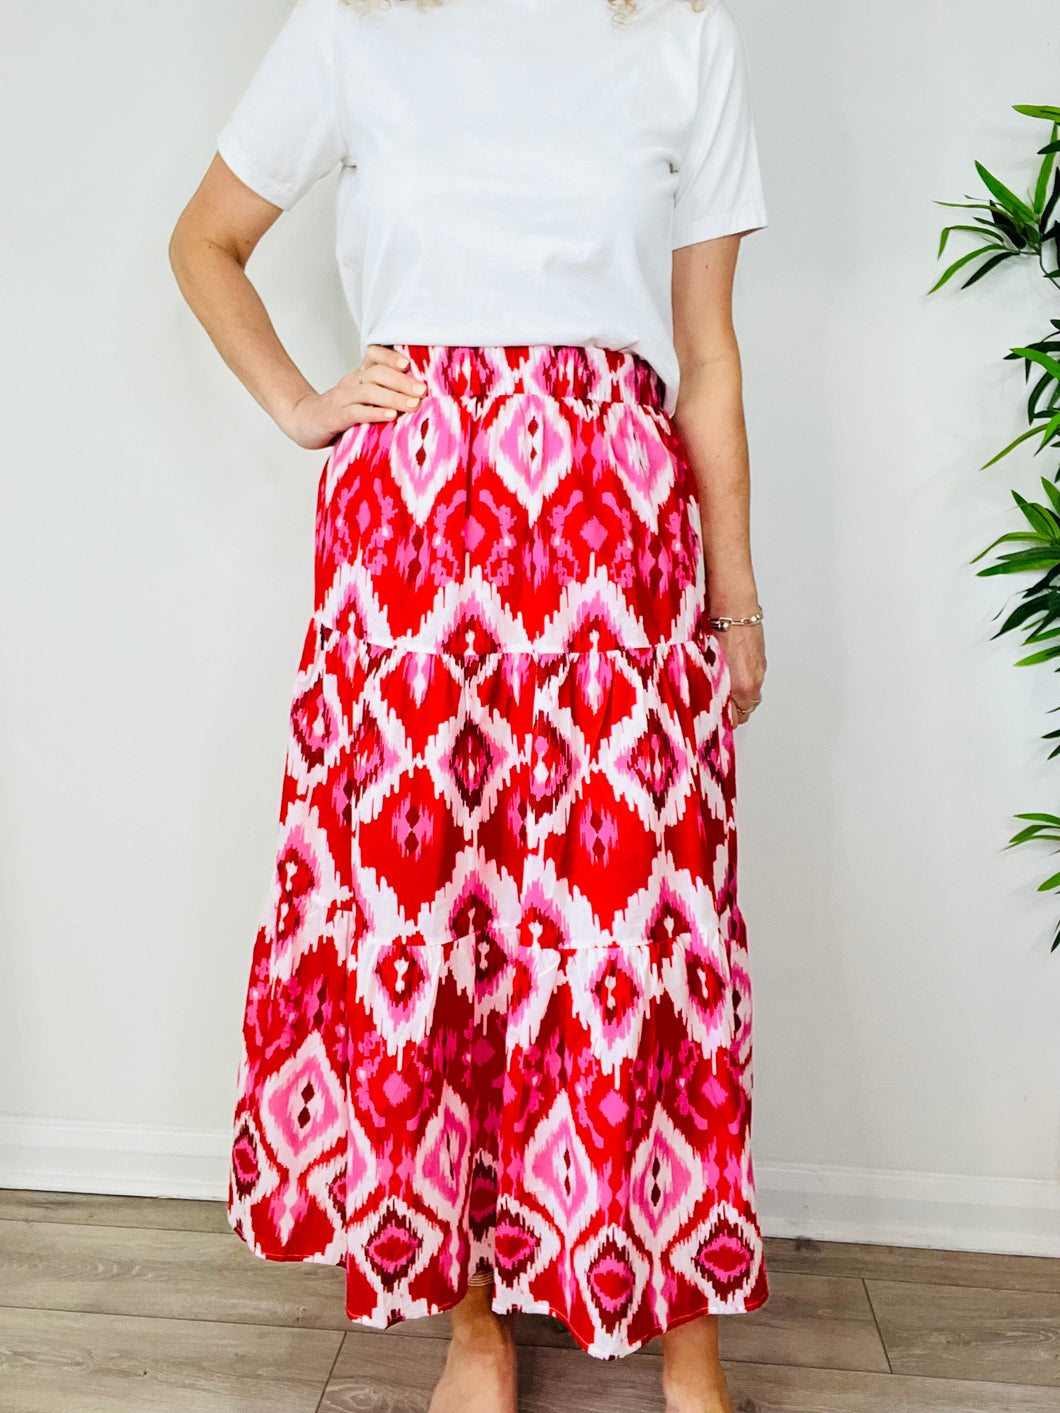 Tiered Patterned Skirt - Multiple Sizes